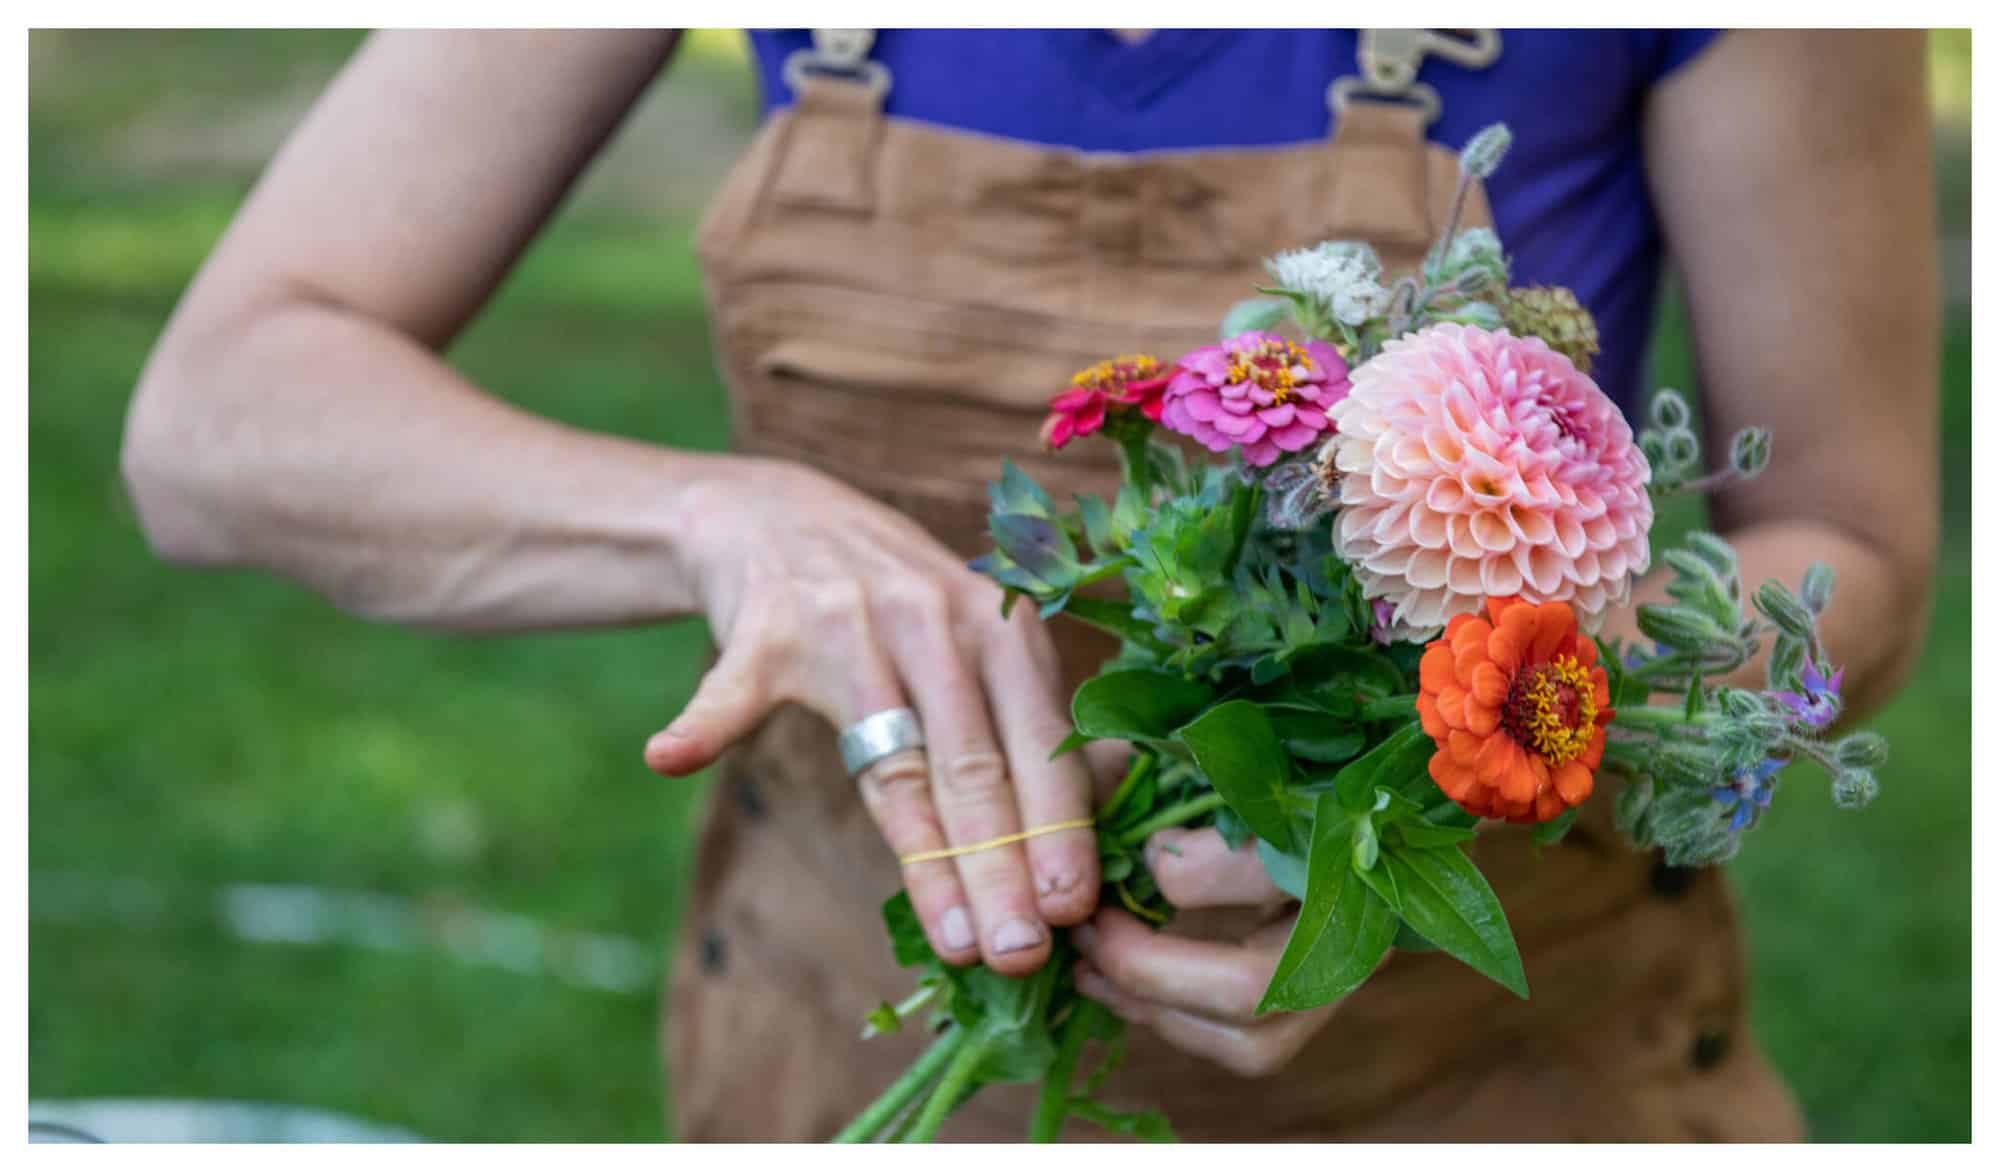 A woman is holding a bouquet of orange, pink, and red flowers from the Veggies to Table farm.